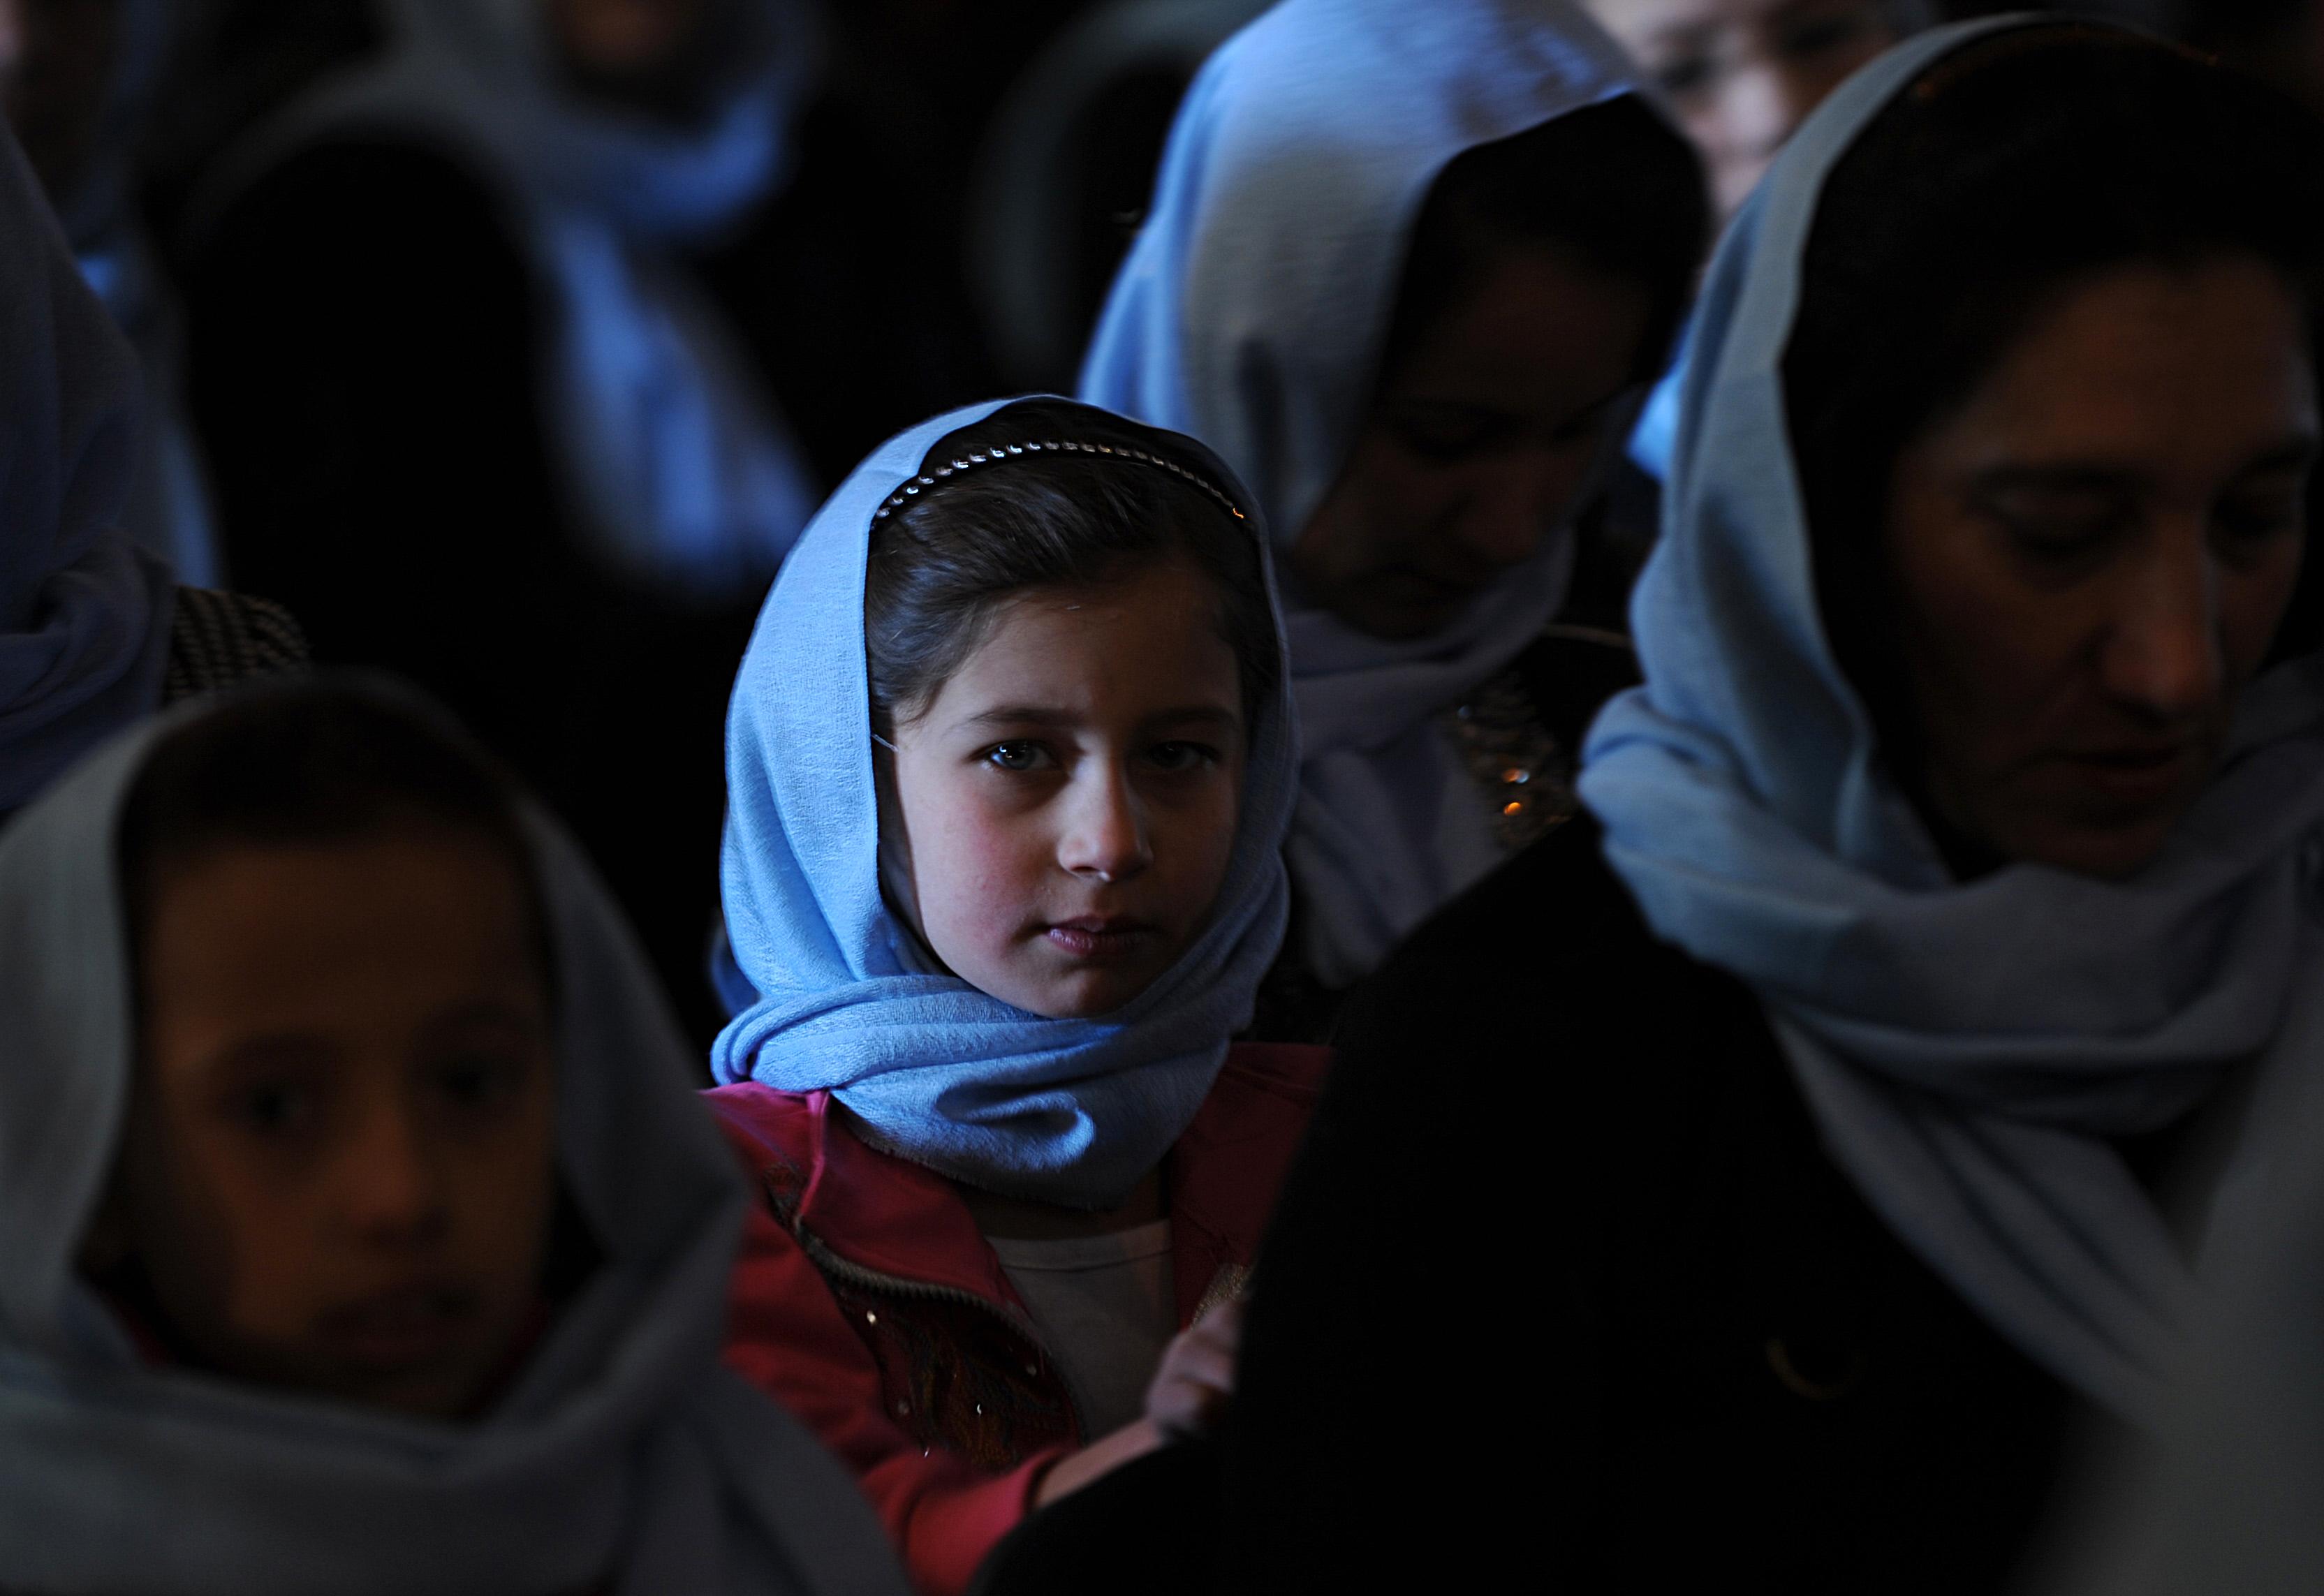 An Afghan girl looks at the camera during a Women's Day ceremony held by the All Afghan Women Union in Kabul on March 8, 2009. 